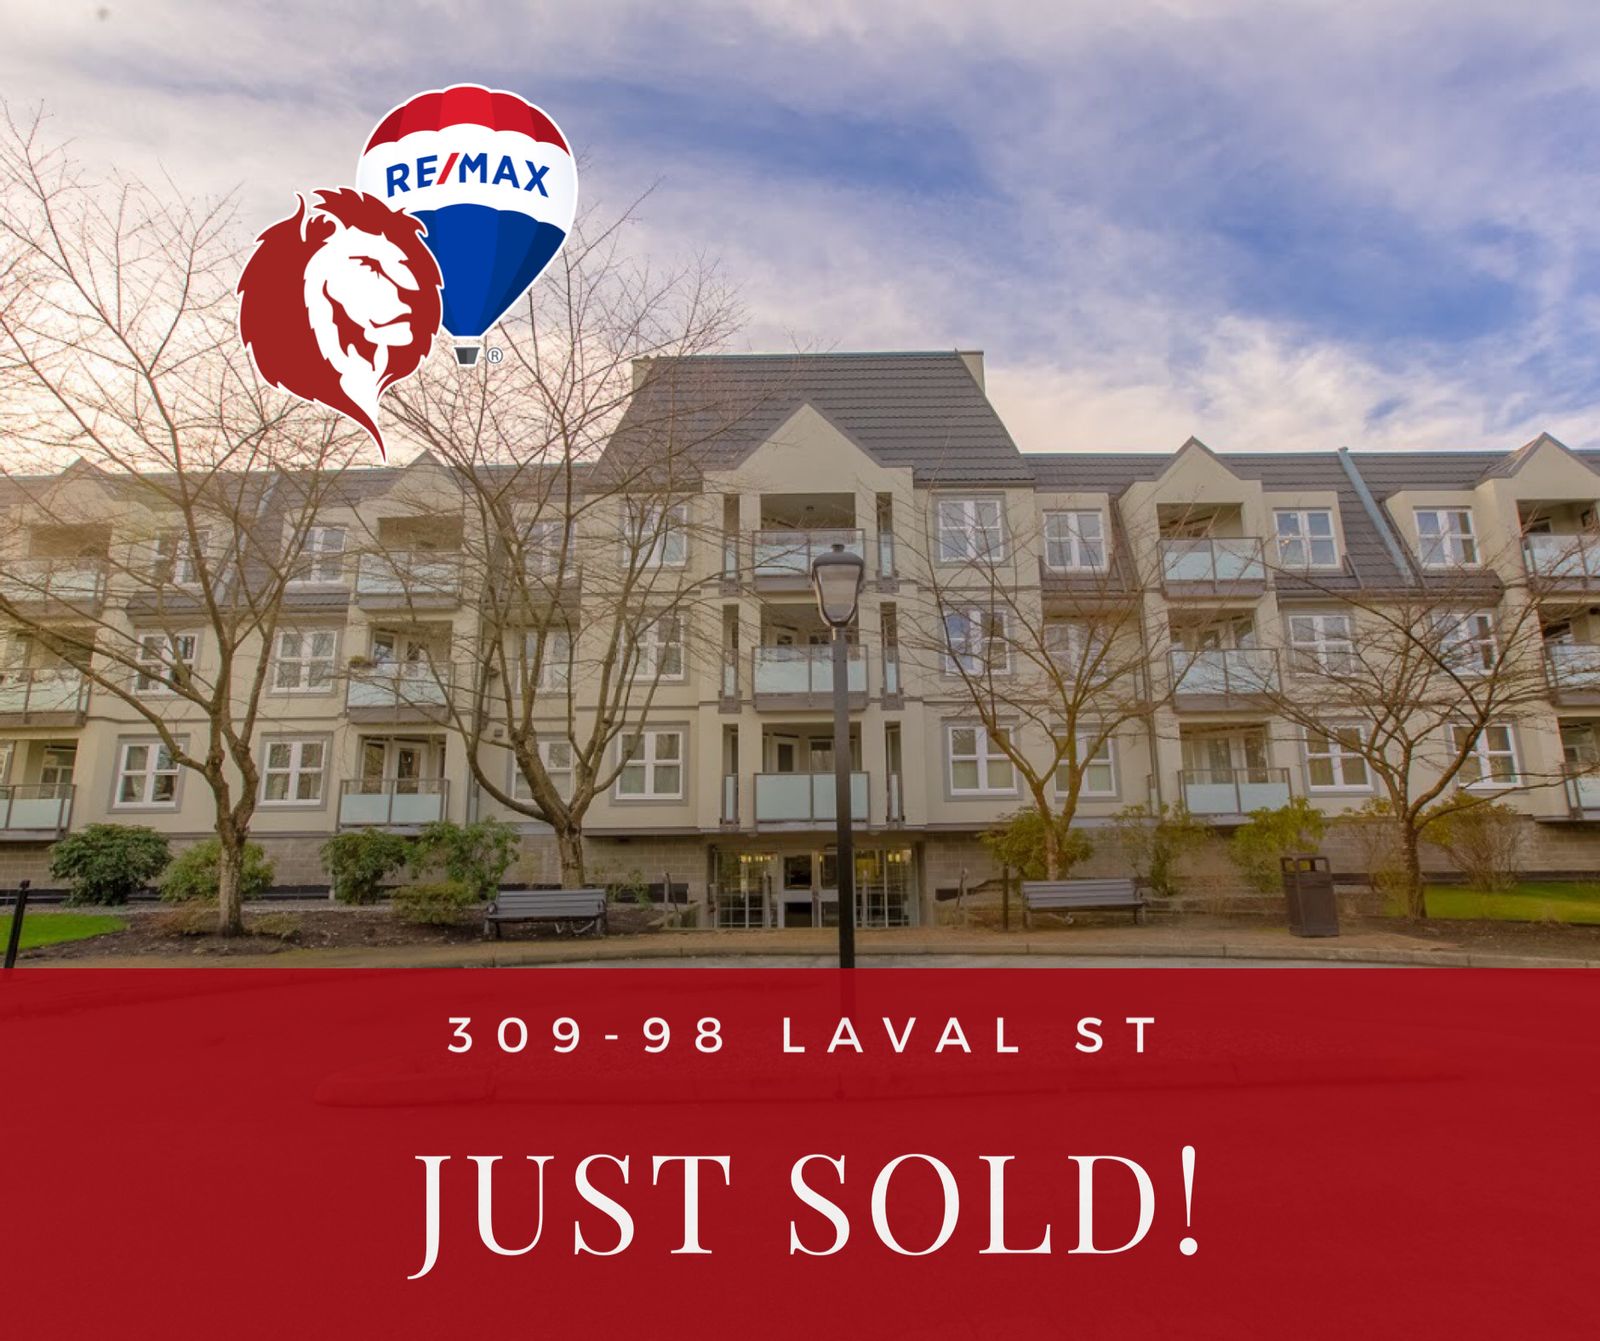 Just Sold!! 309-98 Laval Street, Coquitlam